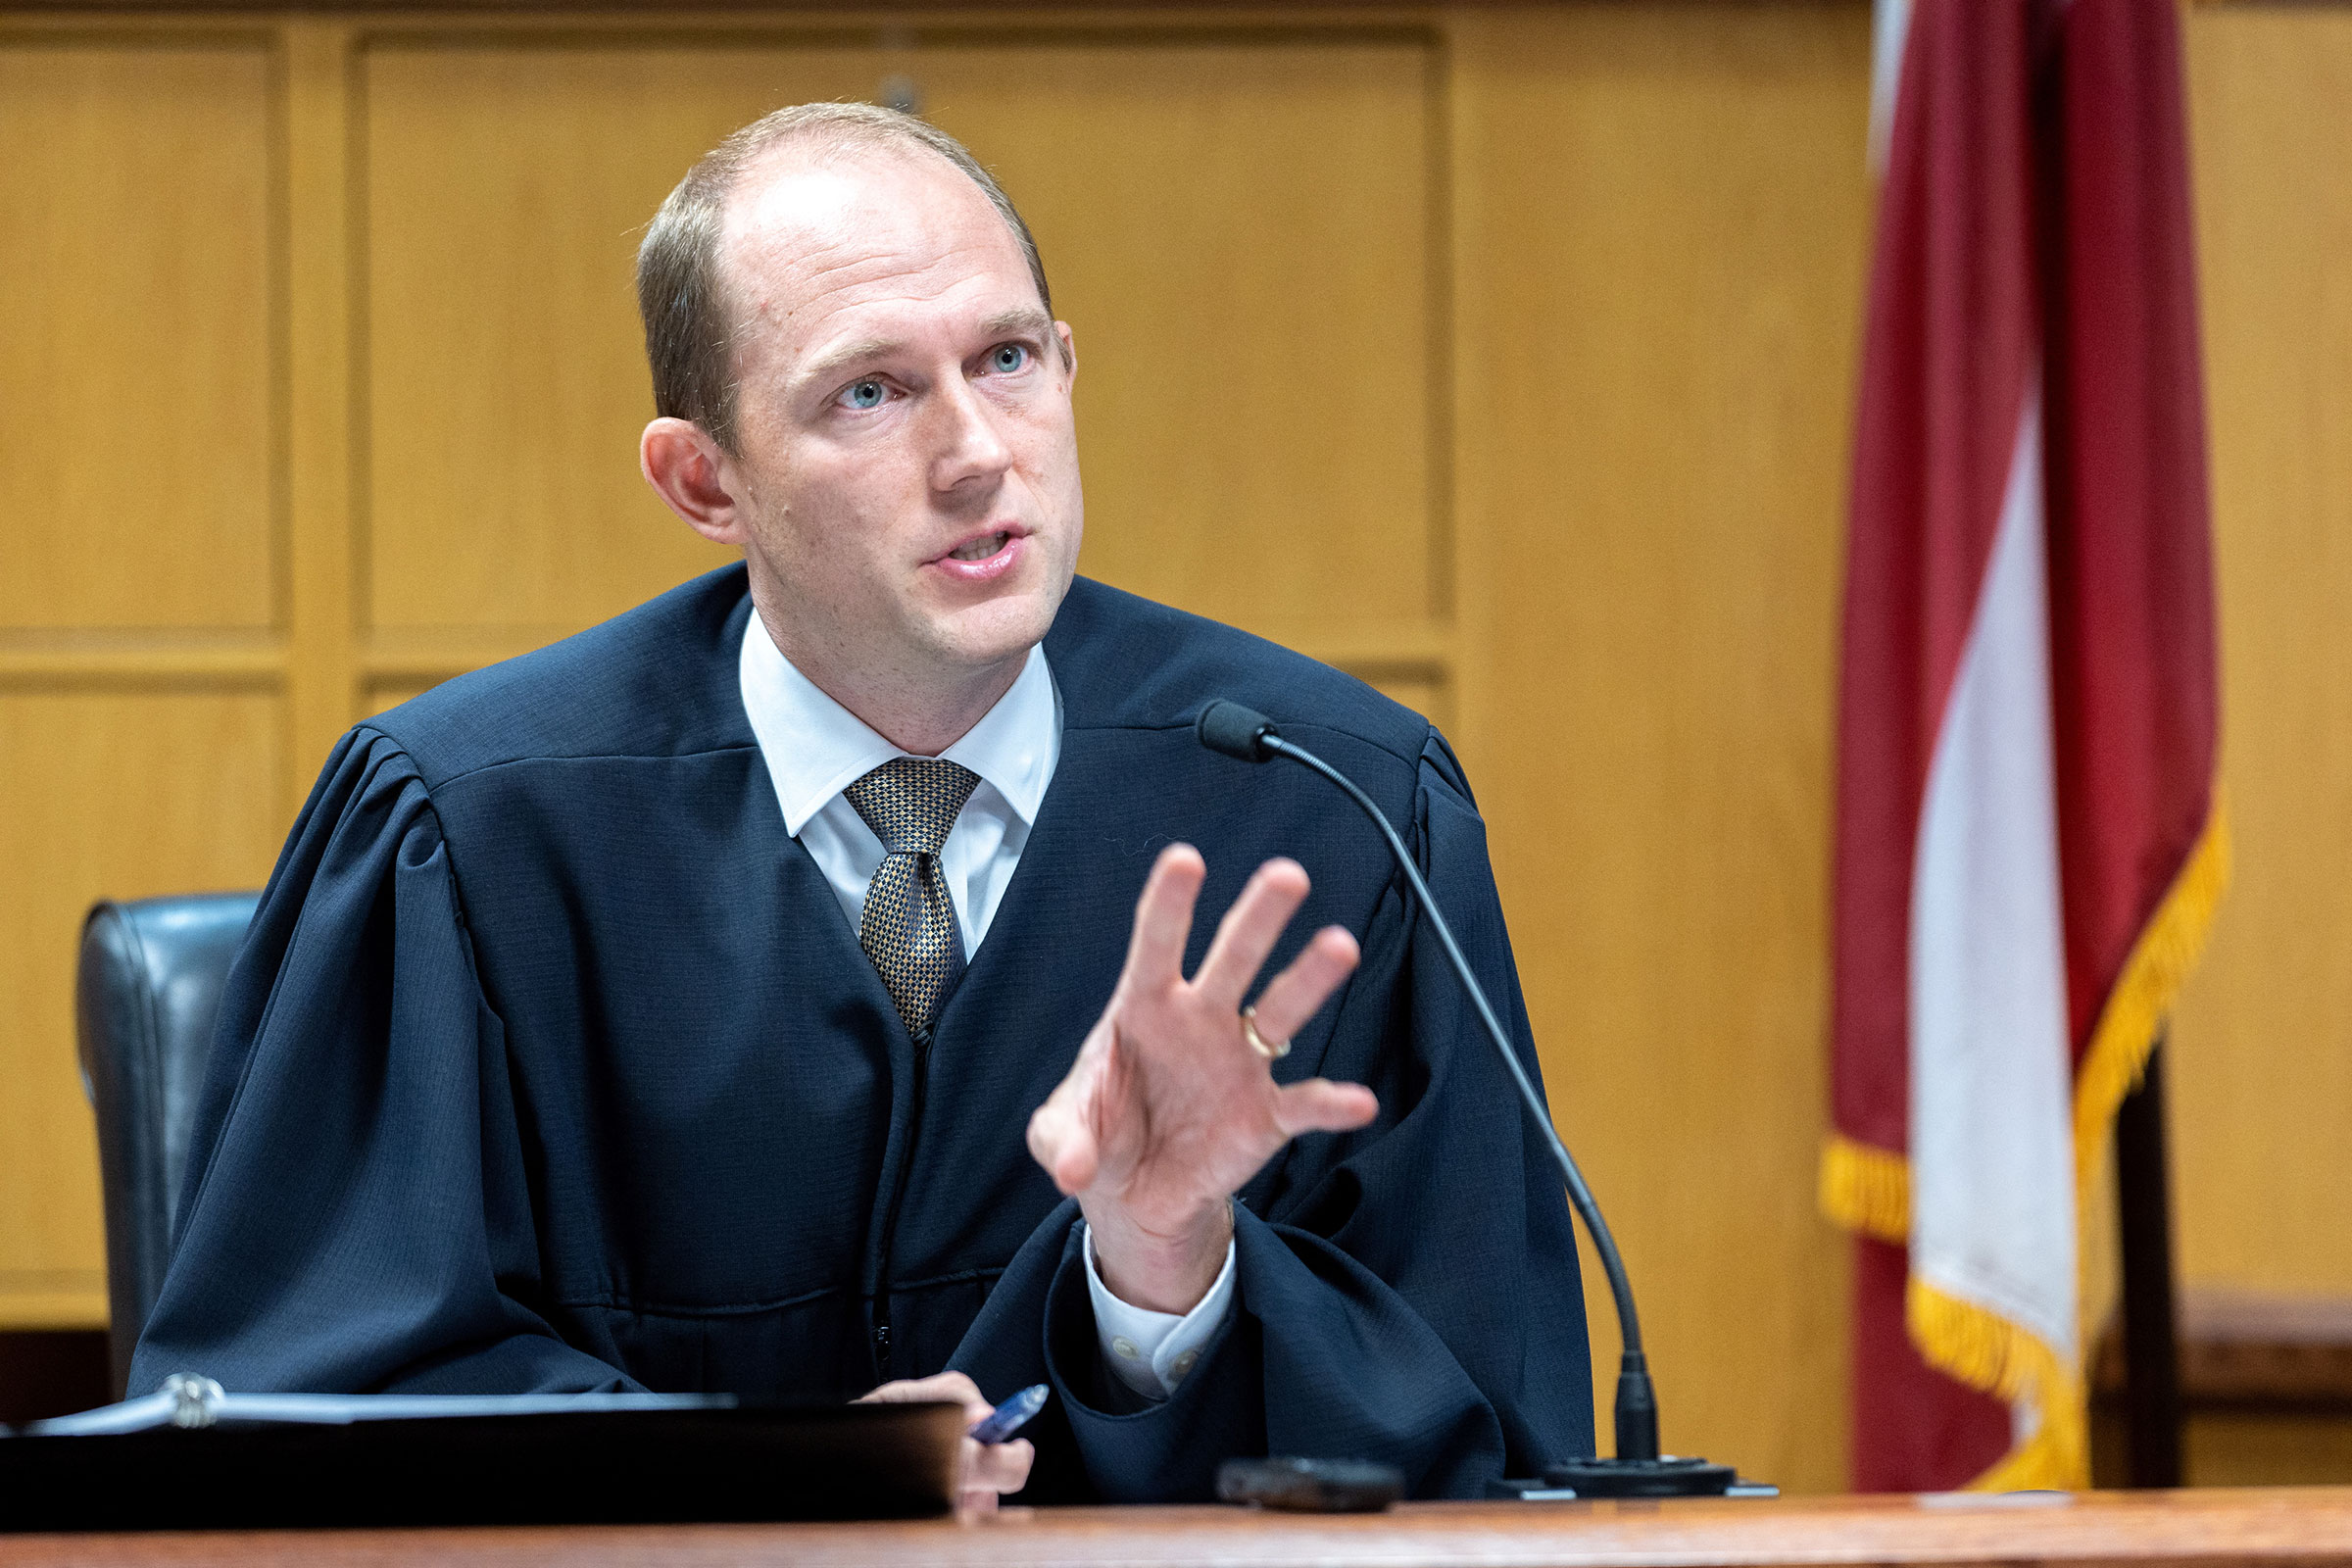 Judge Scott McAfee presides over a hearing regarding media access in the case against former President Donald Trump and 18 others at the Fulton County Courthouse in Atlanta on Thursday, August 31.